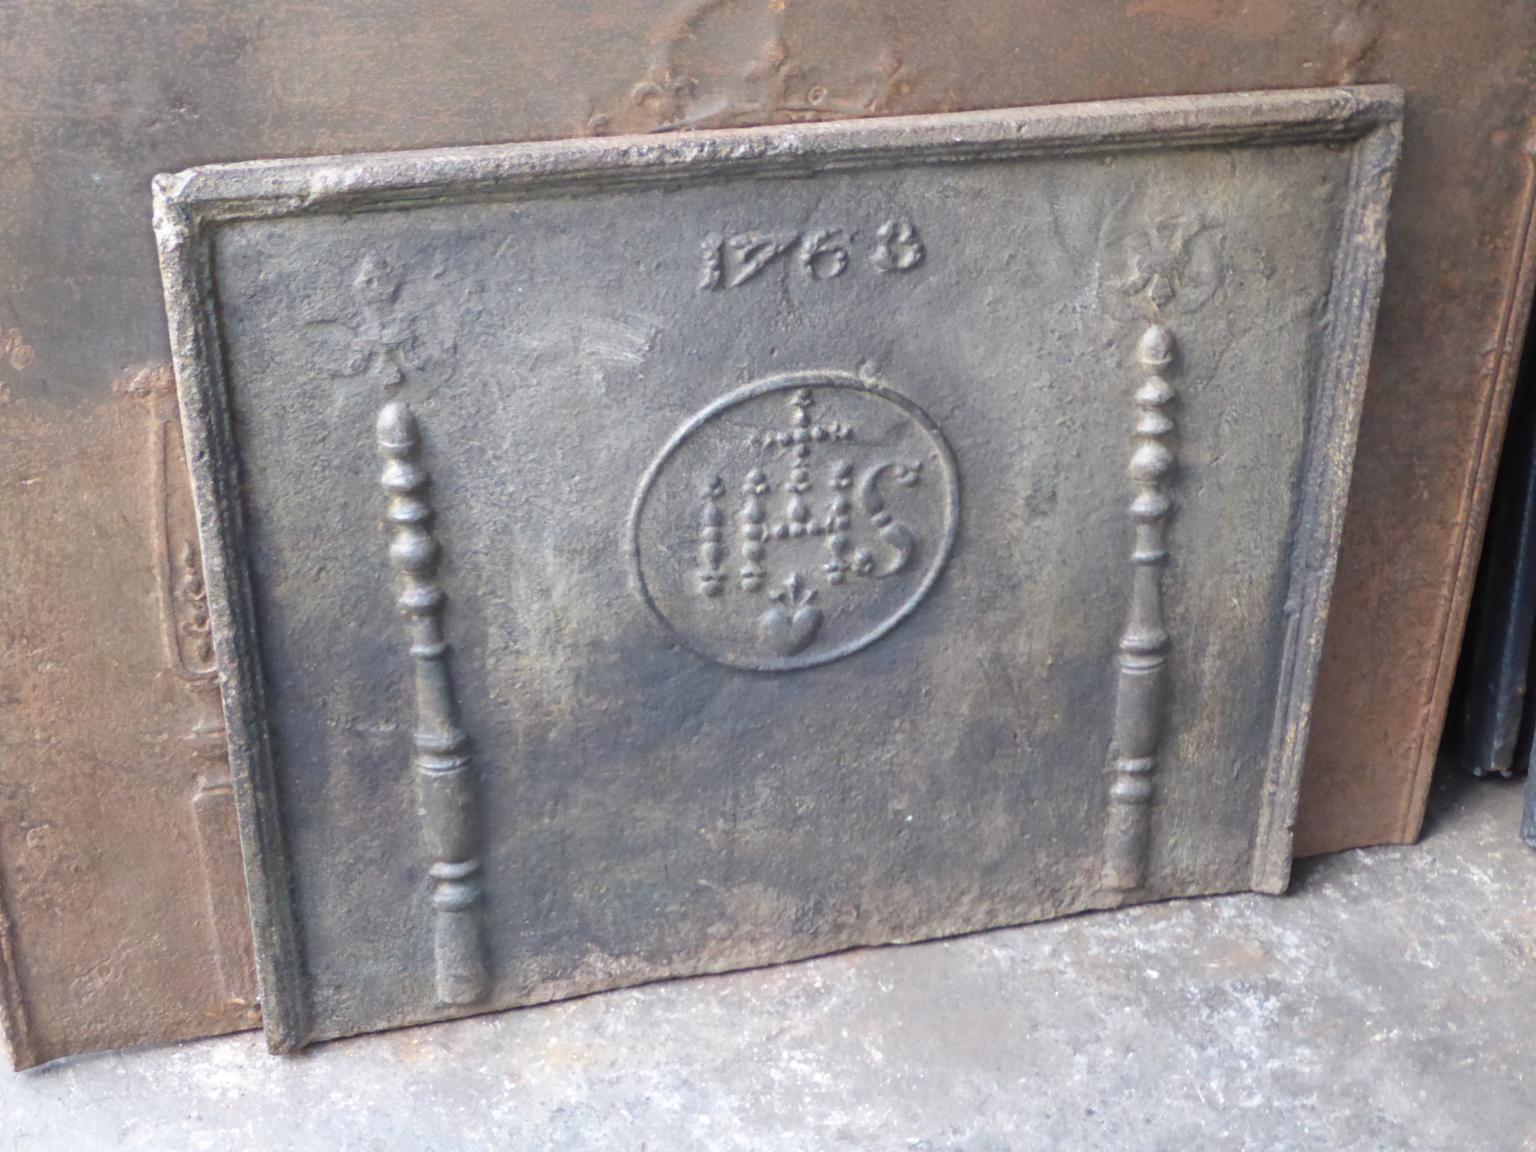 18th century Louis XIV French fireback with pillars, an IHS monogram and the date of production 1768. The monogram IHS stands for Iesus Hominum Salvator (Jesus the Savior of Humanity) or In Hoc Signo (In this sign will you win). The pillars refer to